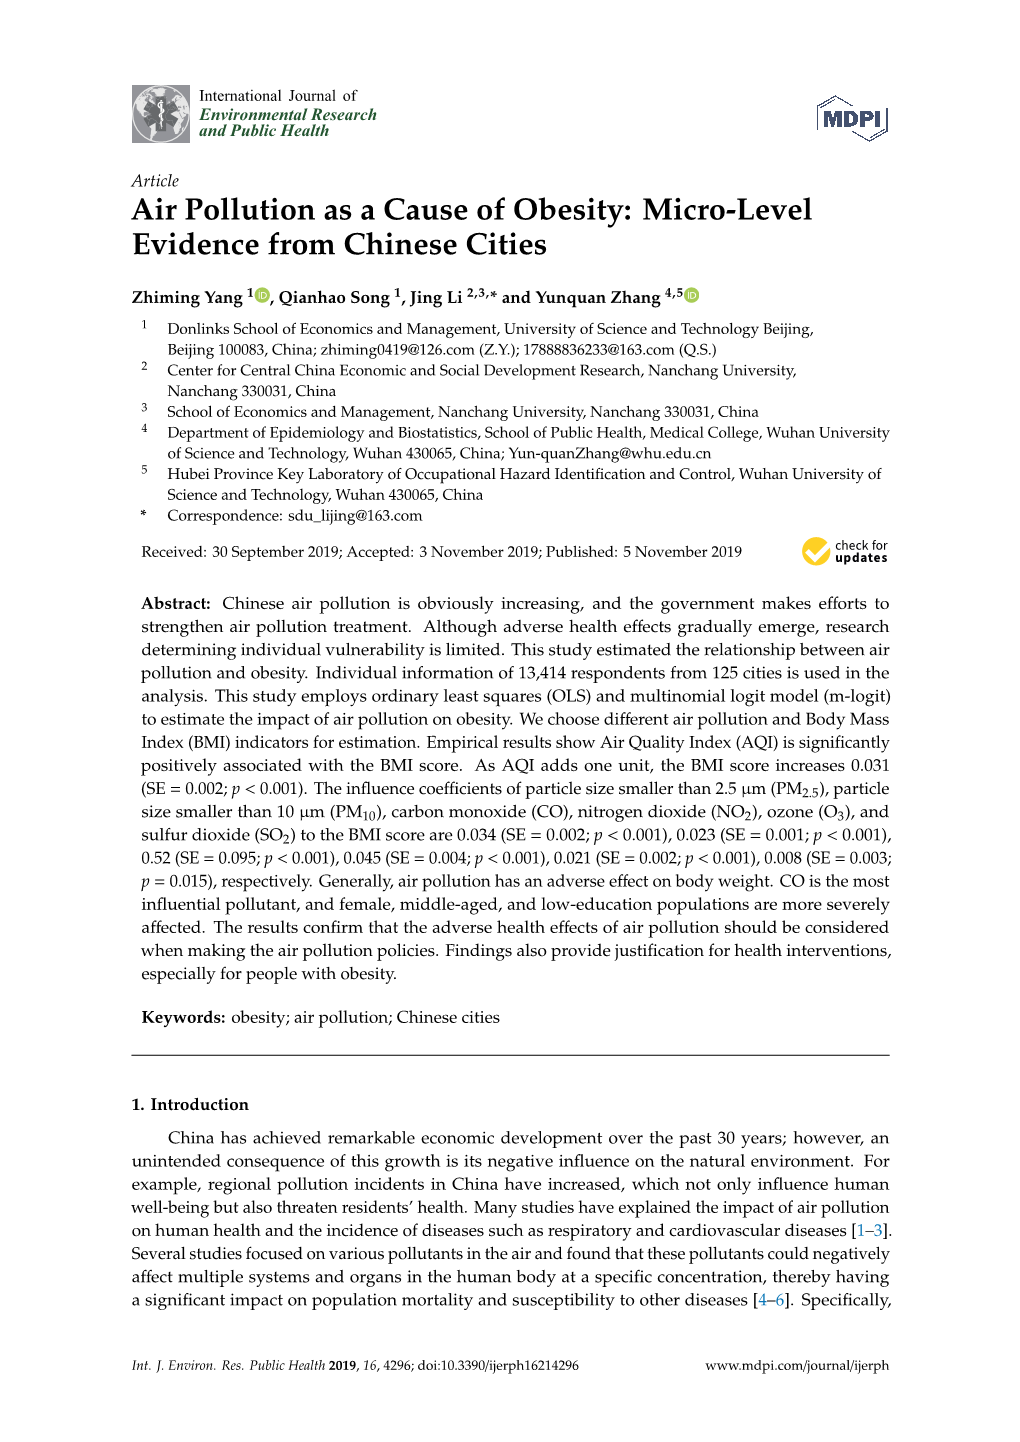 Air Pollution As a Cause of Obesity: Micro-Level Evidence from Chinese Cities